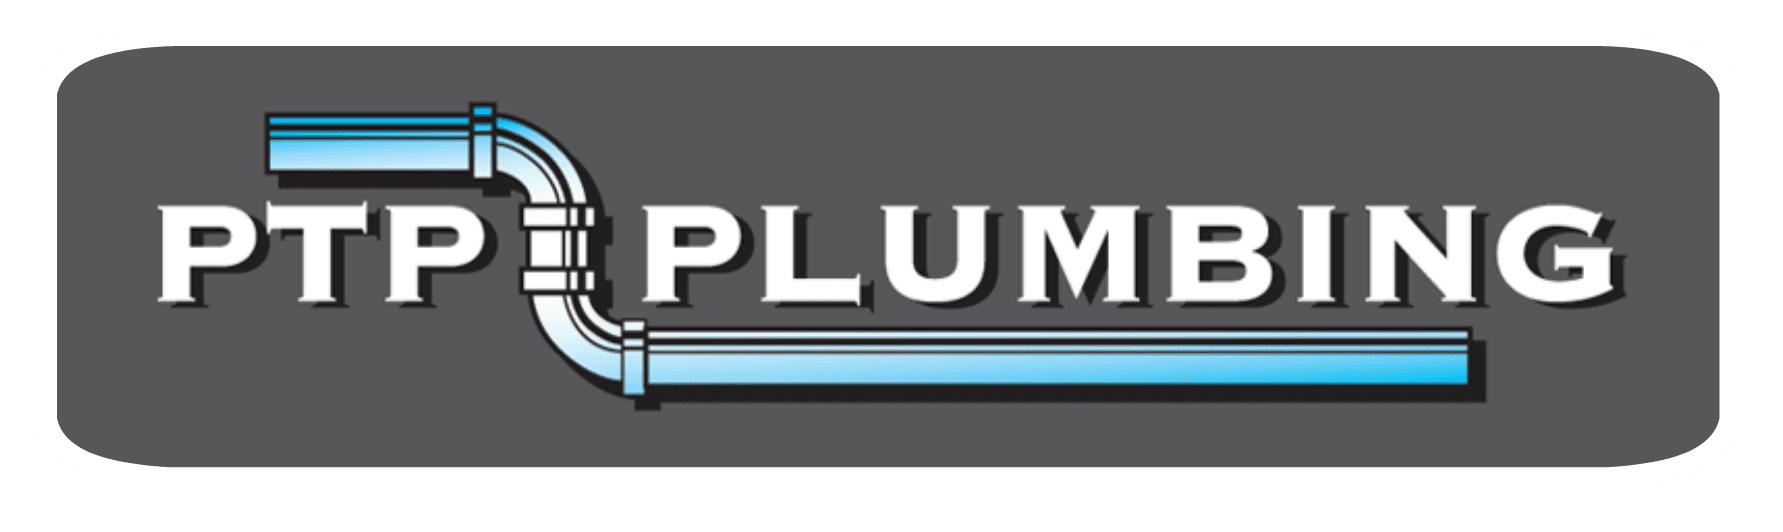 PTP Plumbing and Bathroom Remodeling, Lancaster PA